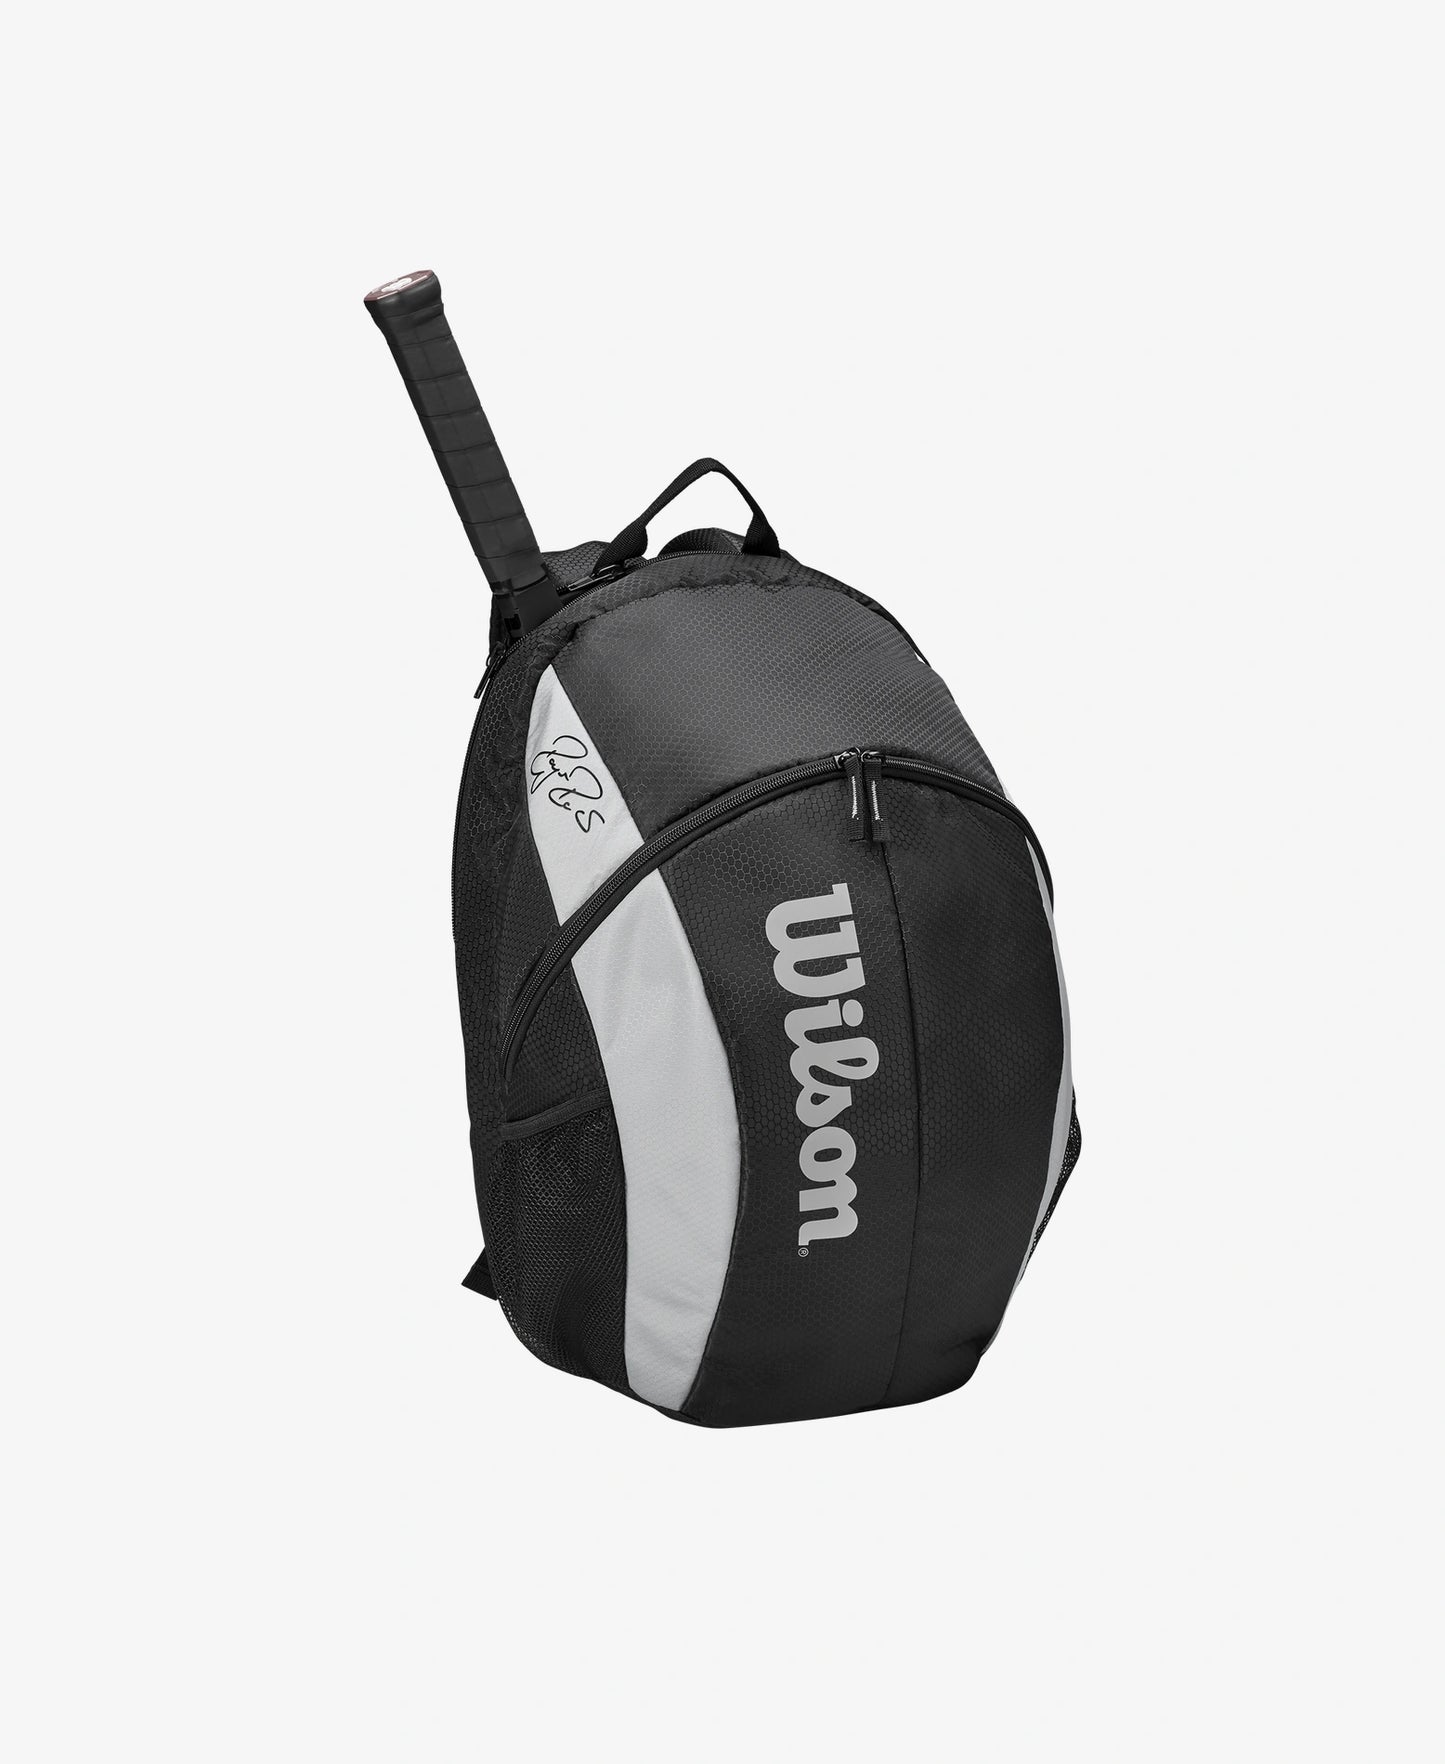 The Wilson Roger Federer Team Backpack in black available for sale at GSM Sports.      